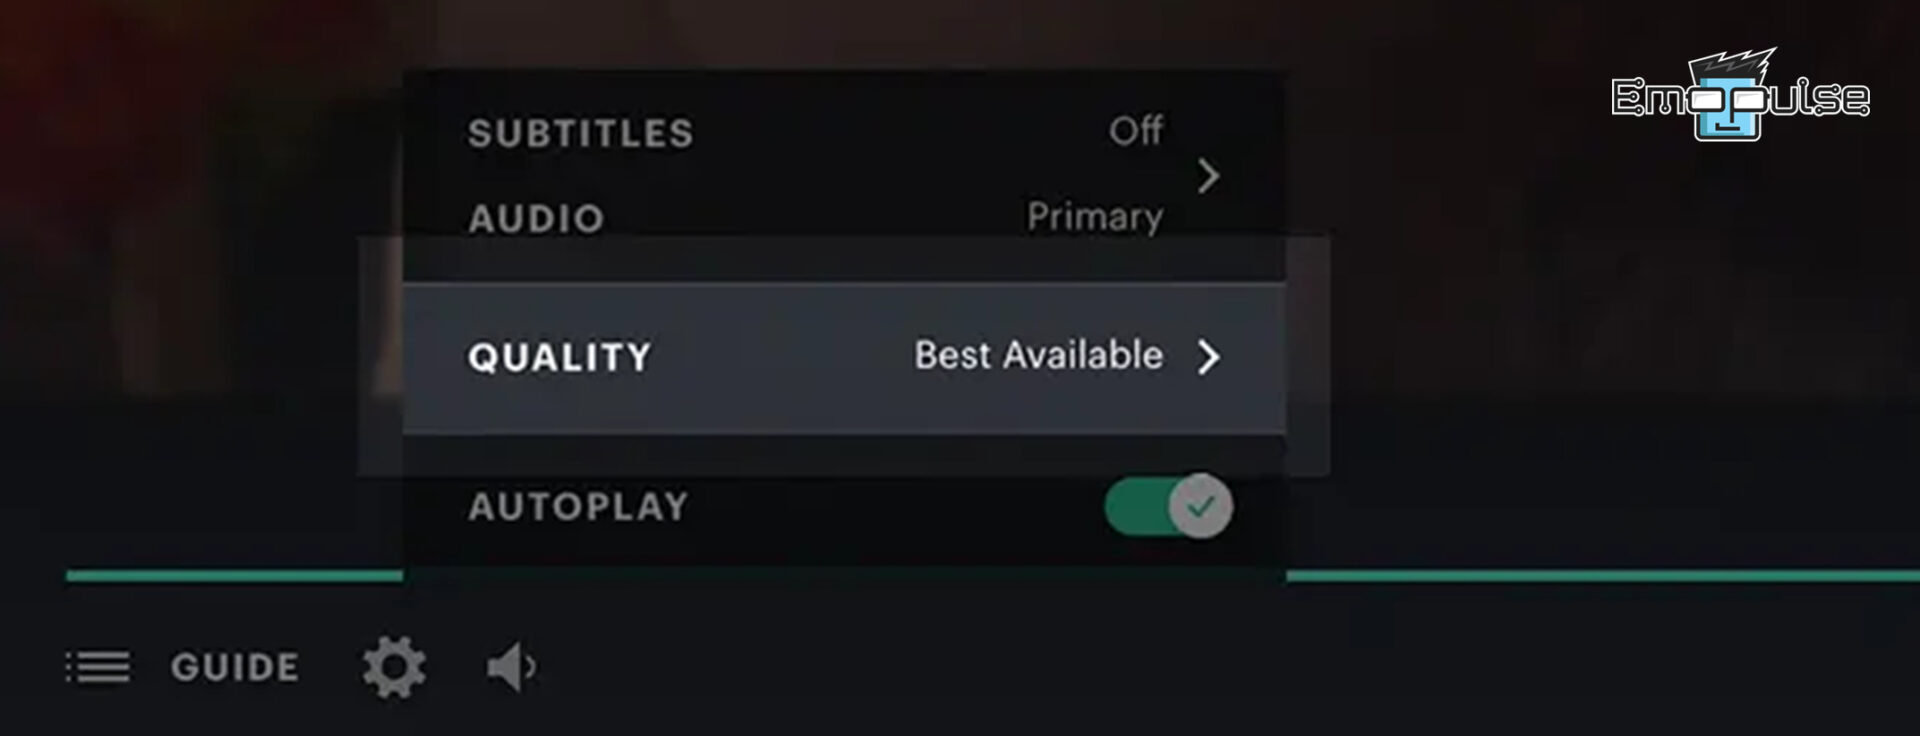 Fixed Hulu Audio Not Working issue by adjusting video quality settings